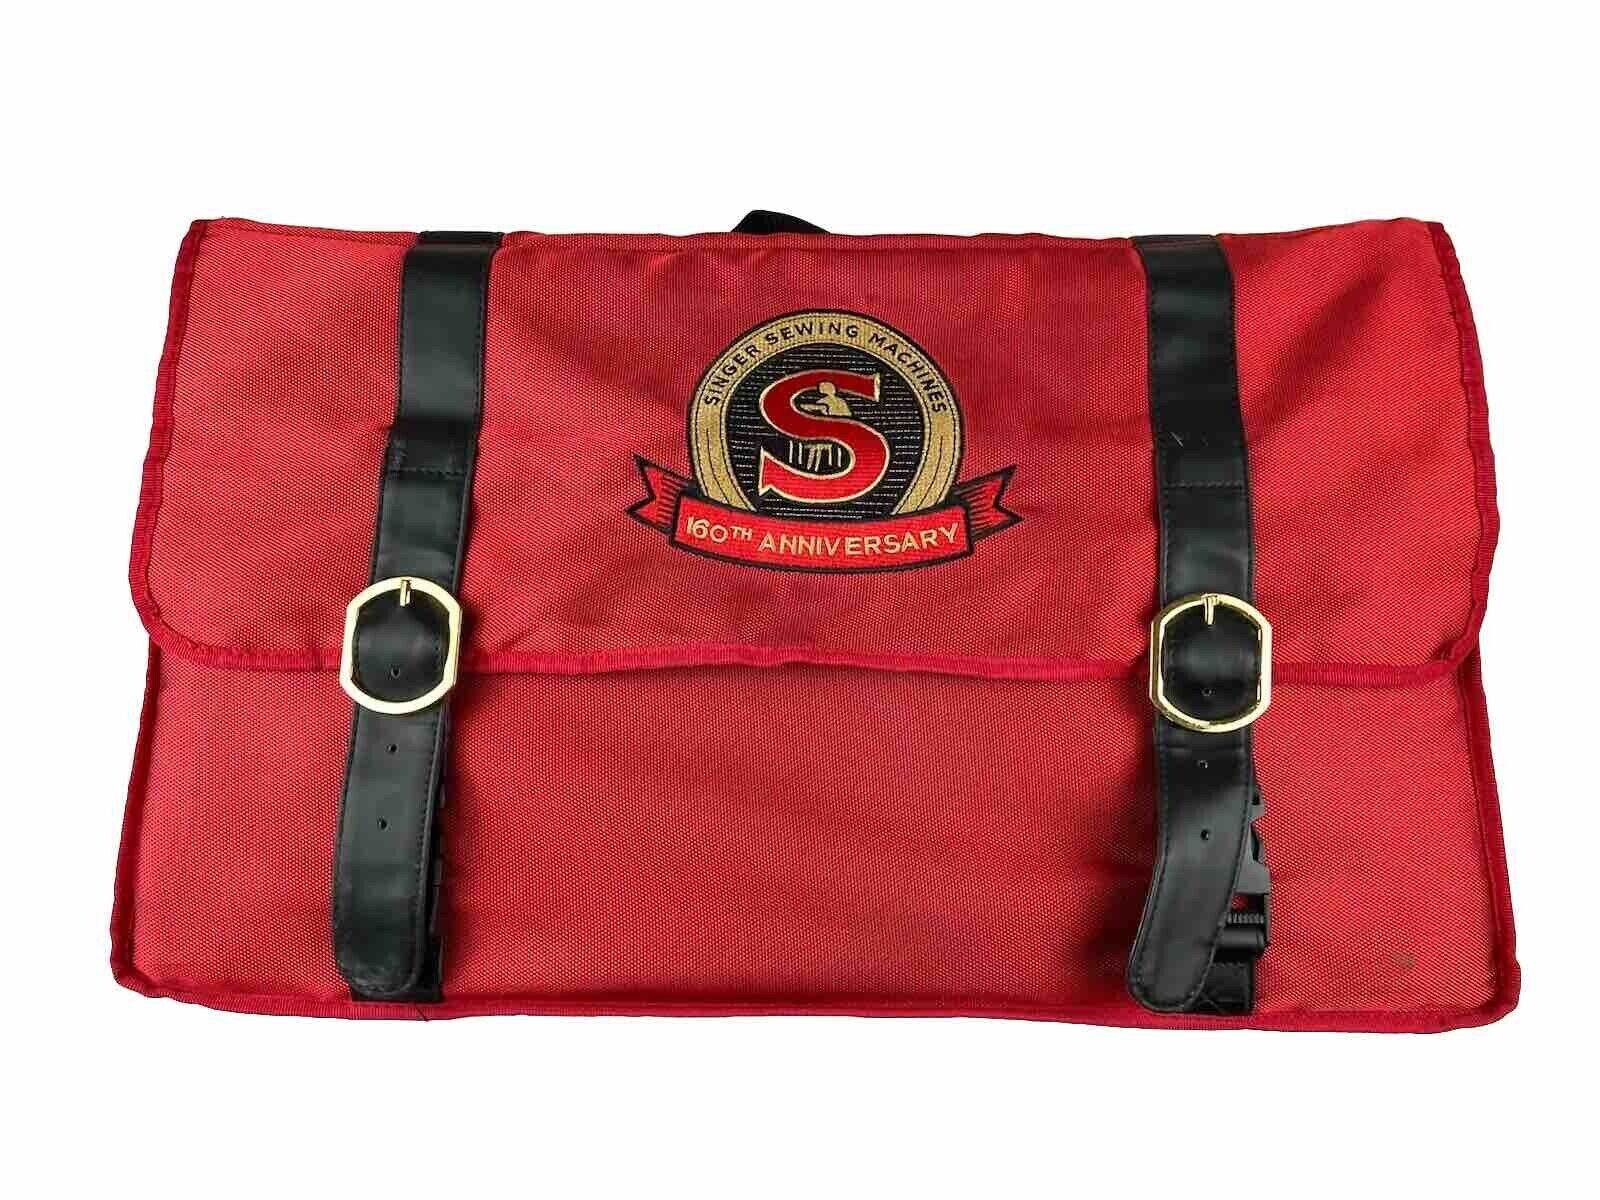 Singer 160th Anniversary Limited Edition Sewing Machines Travel Bag, Bag Only